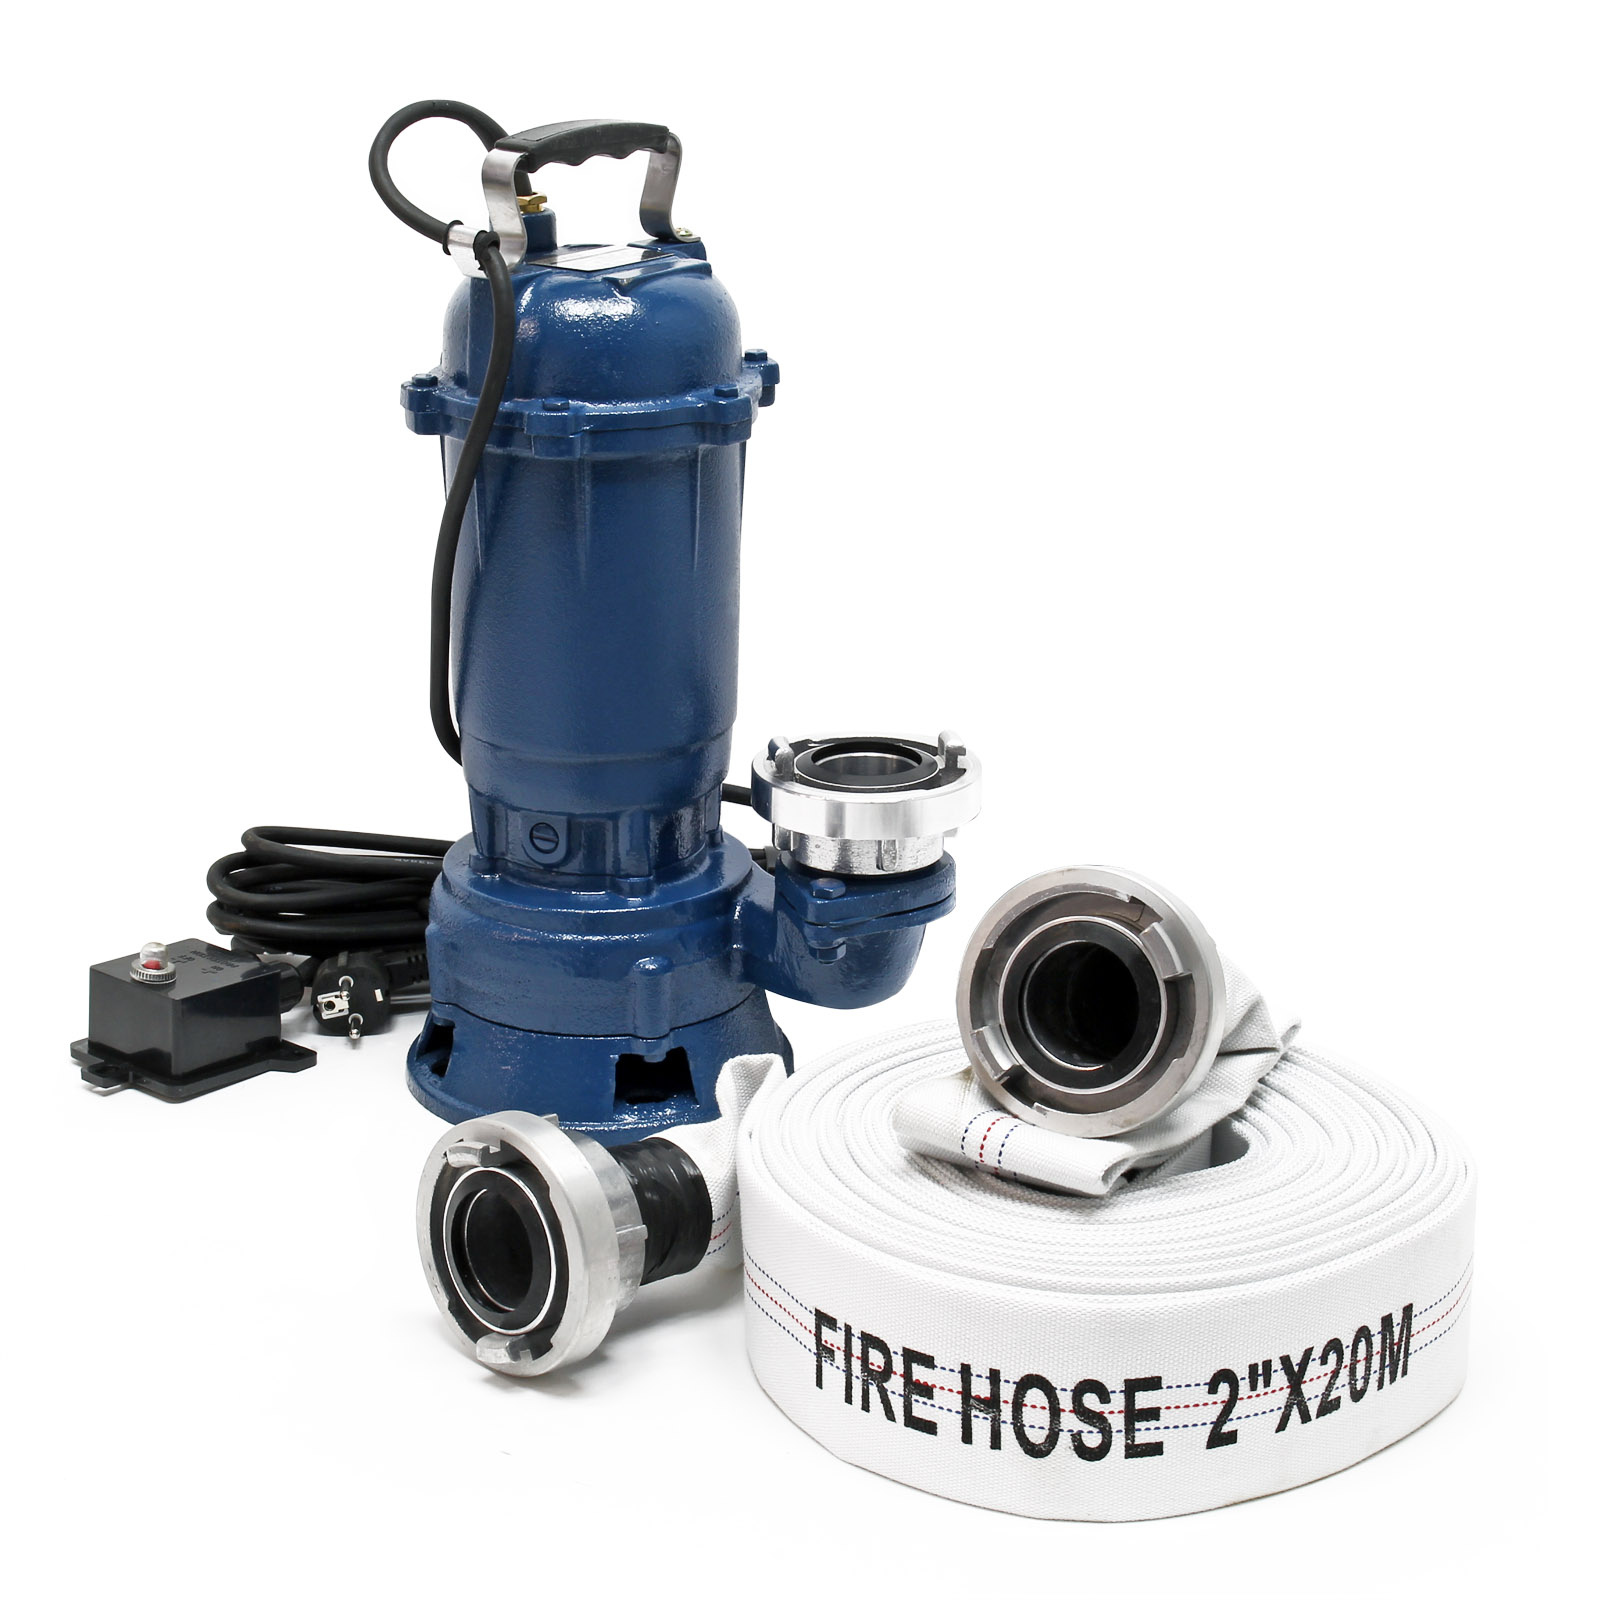 Waste Water Pump 550W 10,000l/h with 20m Hose Submersible Pump